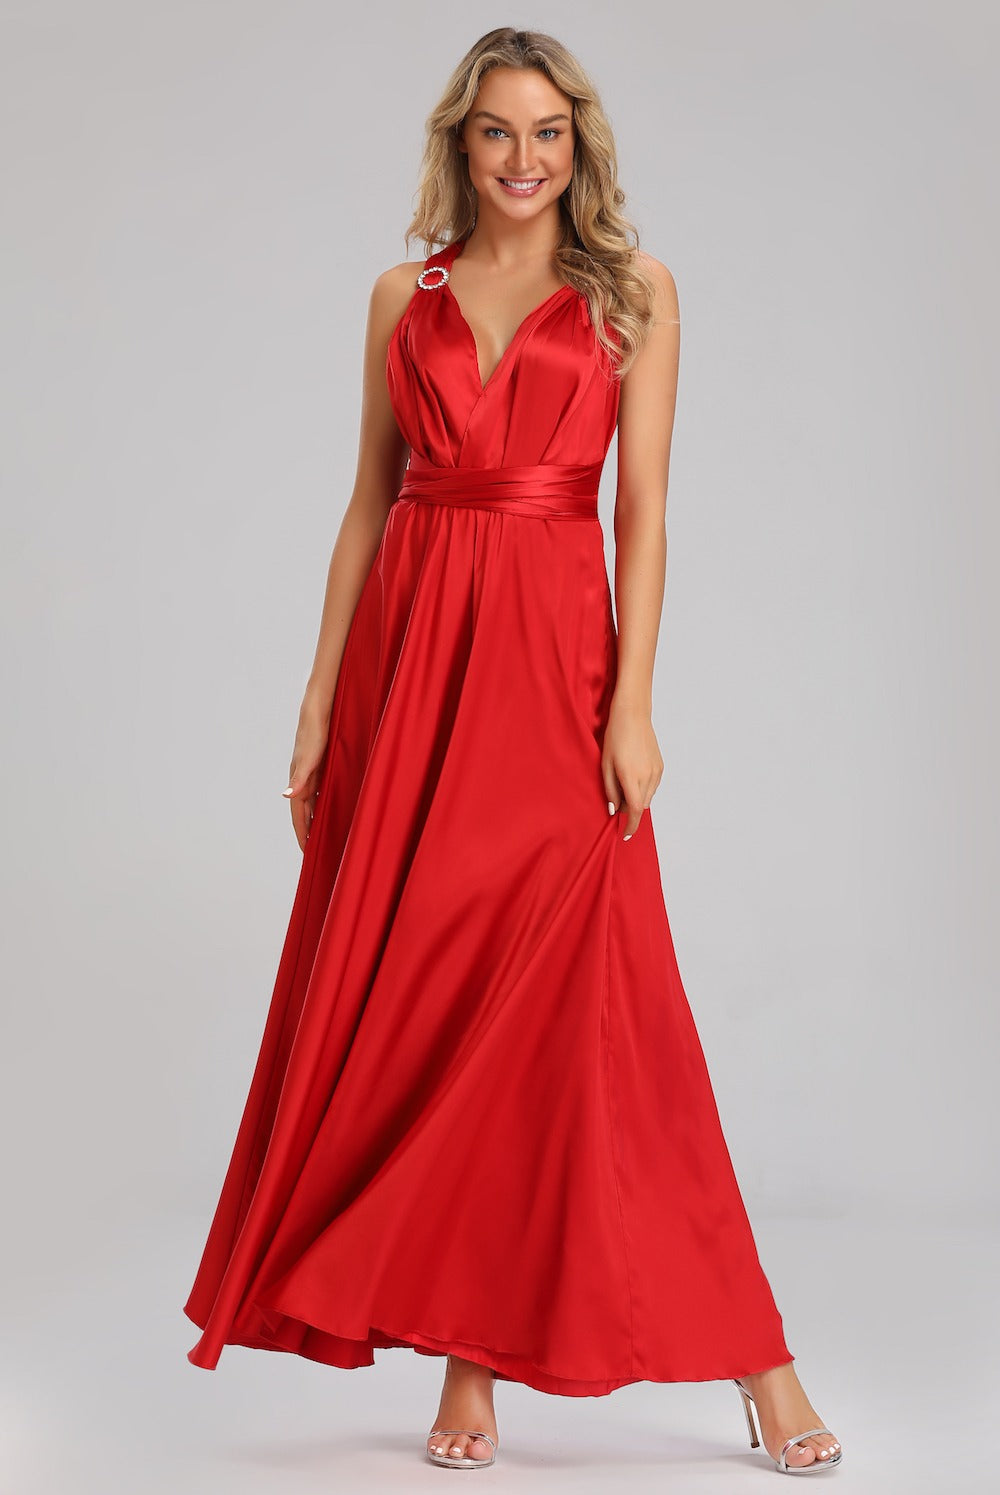 Rochie Amelie, Silky Satin Fabric, Passional red